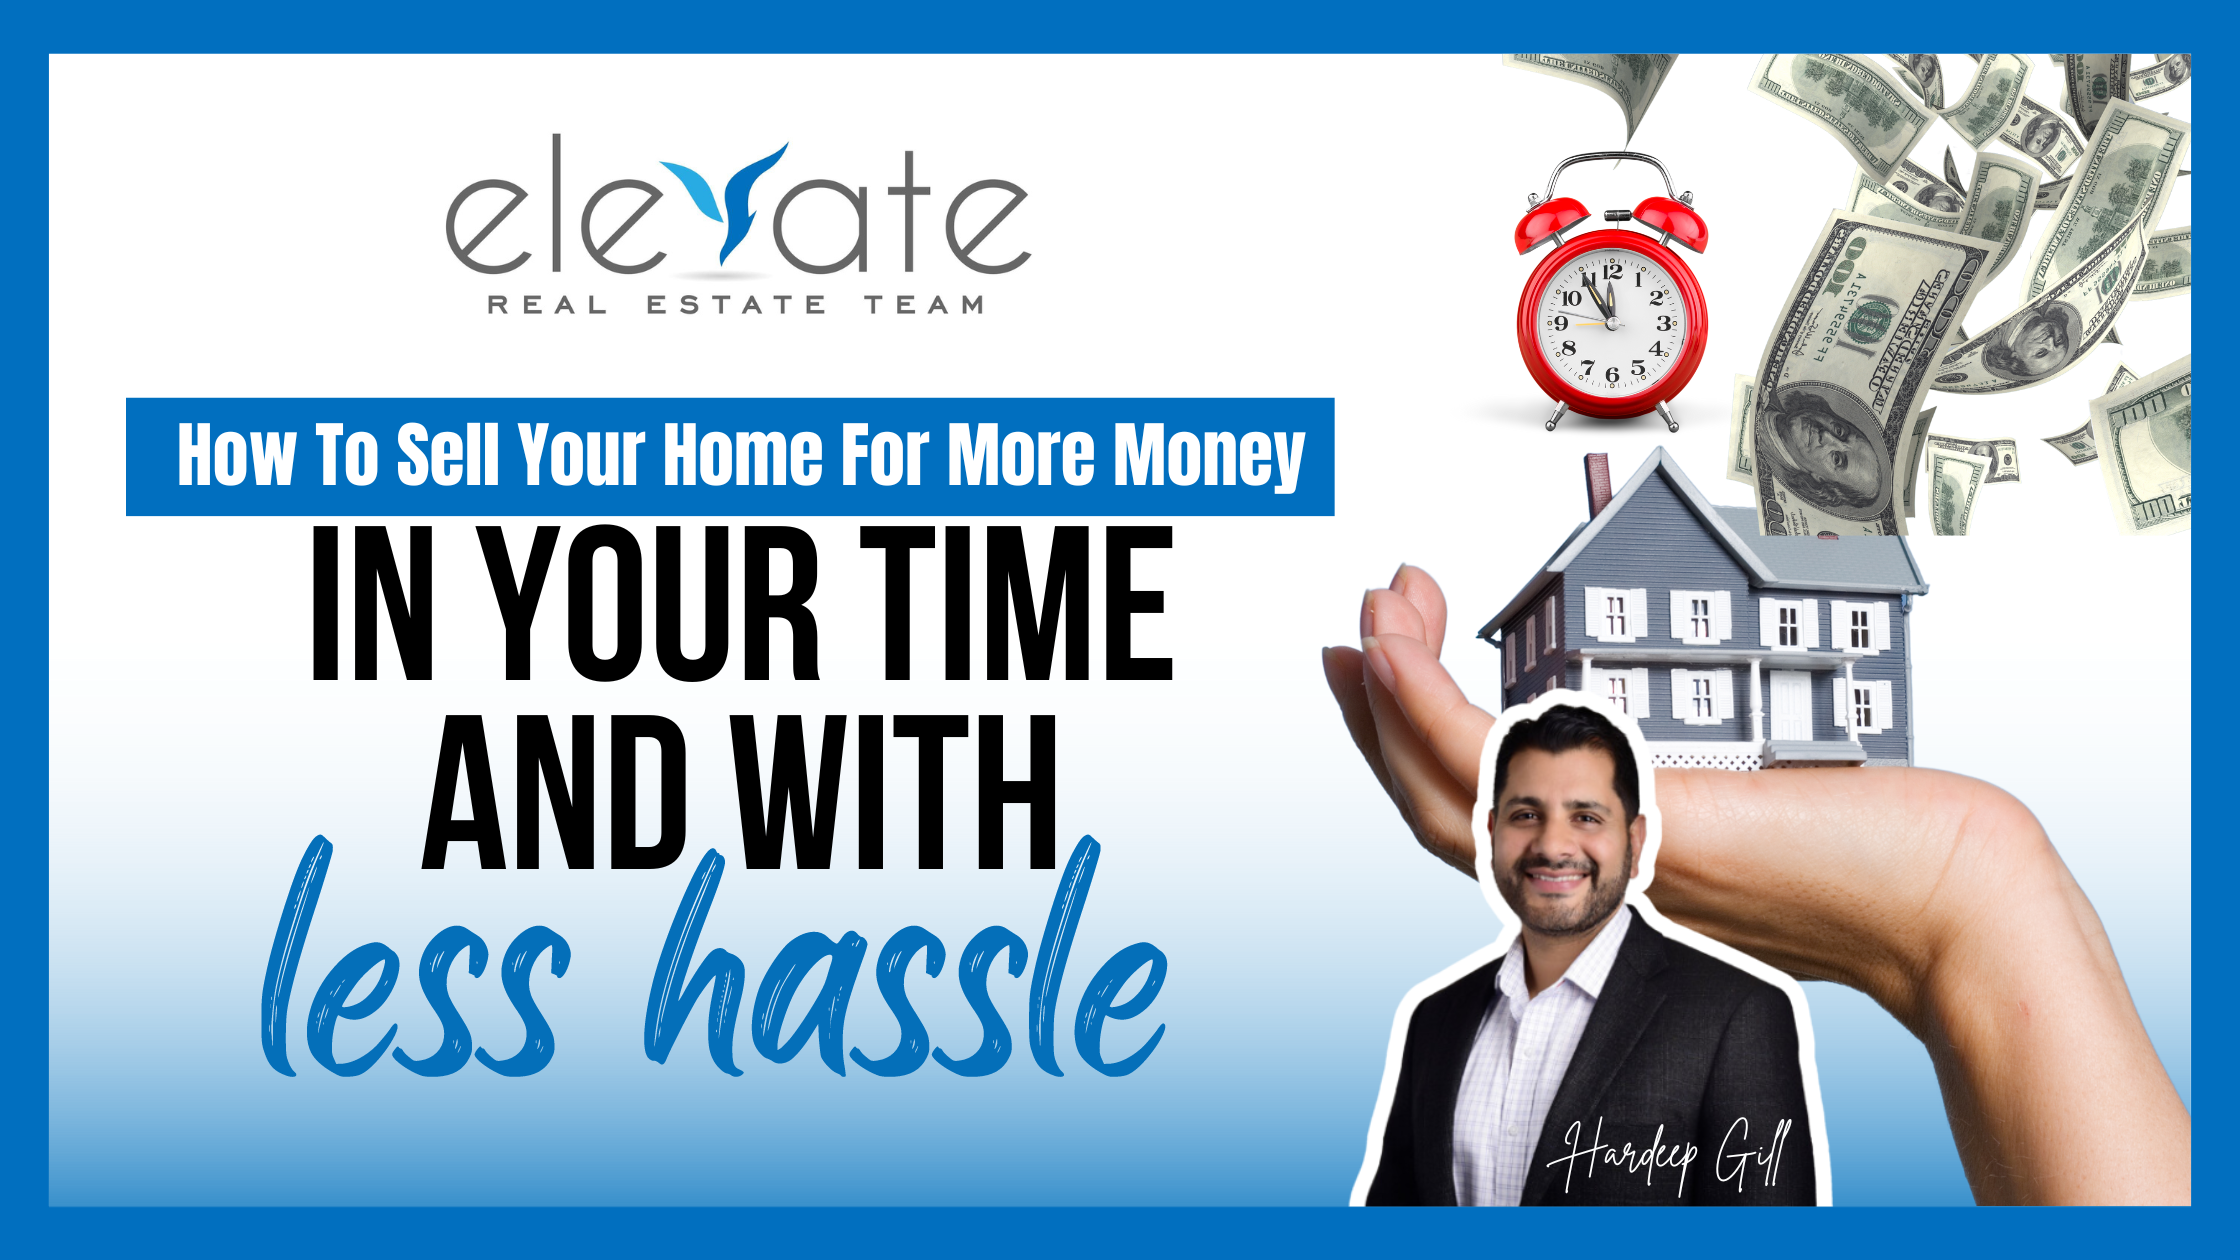 How To Sell Your Home For More Money In Your Time And With Less Hassle